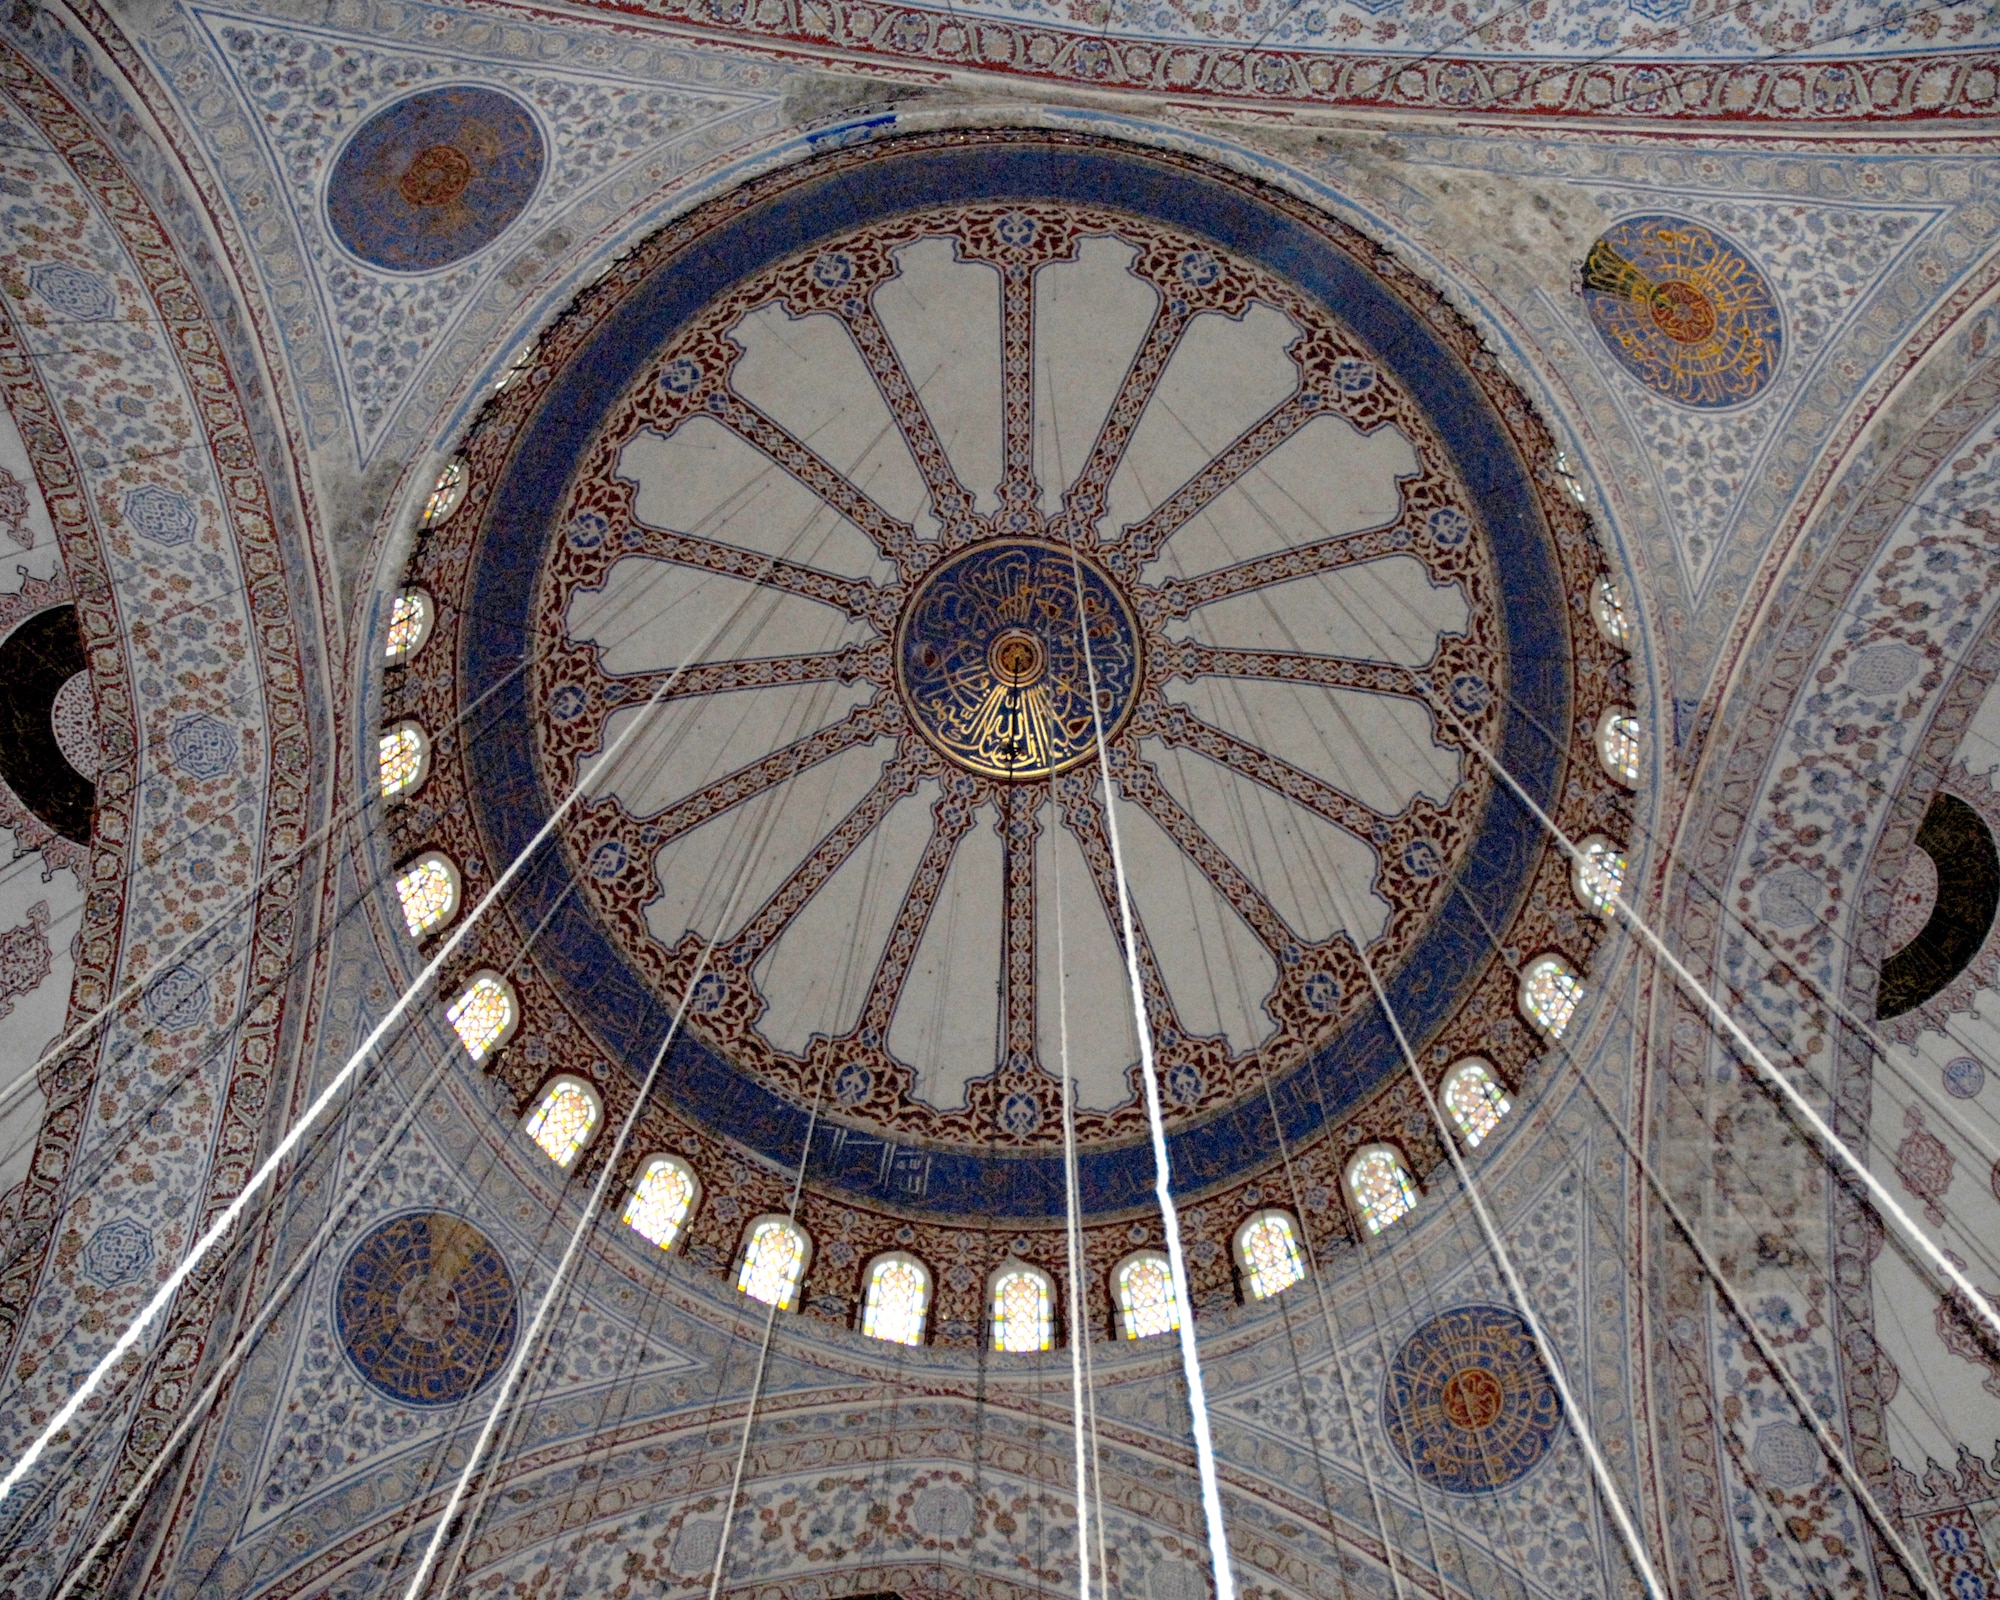 The large domed ceiling displays the beautiful tiles that have given the of the Sultan Ahmet Mosque, or the Blue Mosque, its nickname. Construction on the mosque began in 1606 and concluded in 1616. The mosque has six minarets and 260 windows. (U.S. Air Force photo/Staff Sgt. Lauren Padden)
